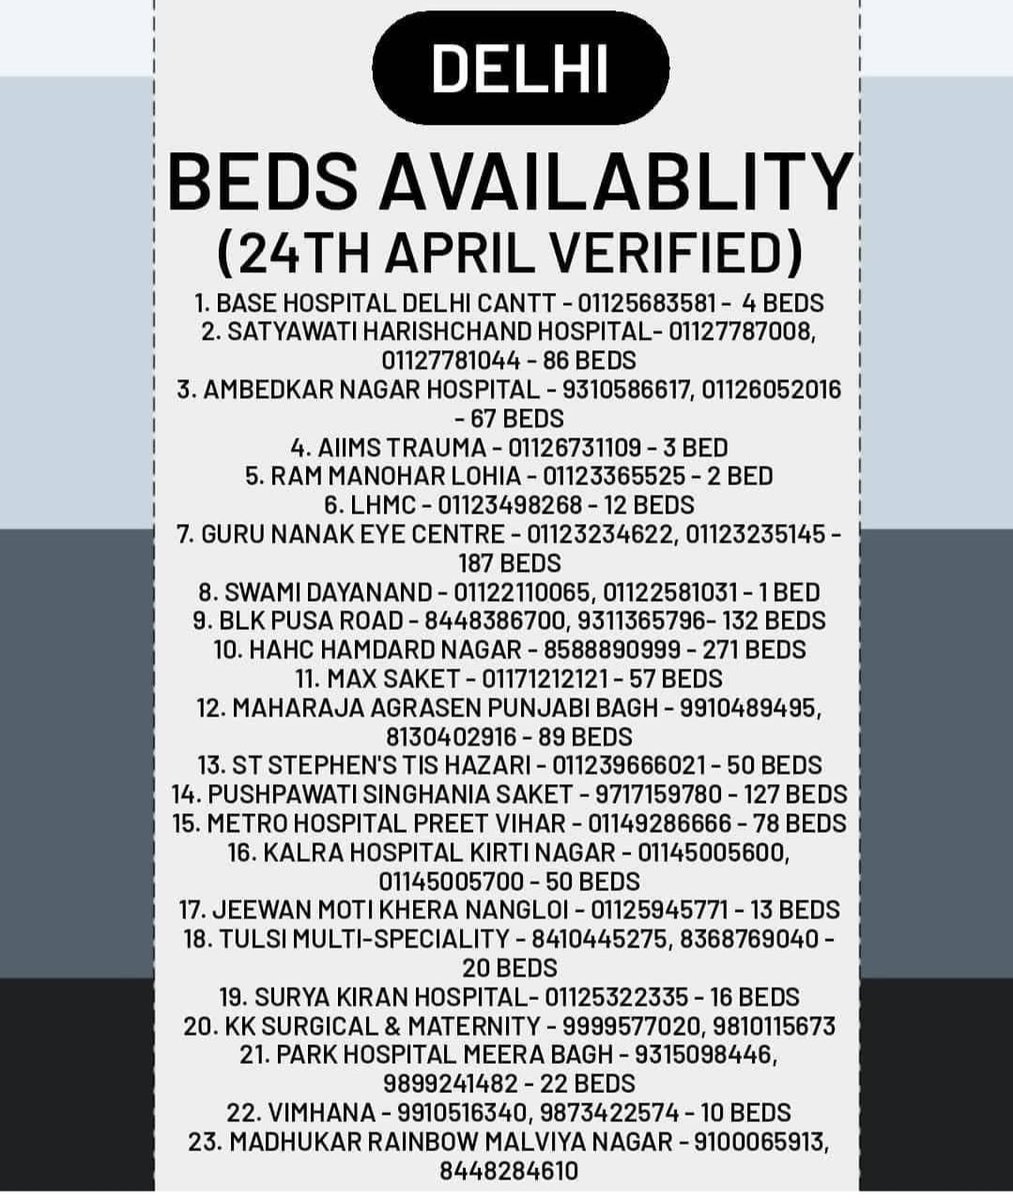 Bed Availability in Delhi :